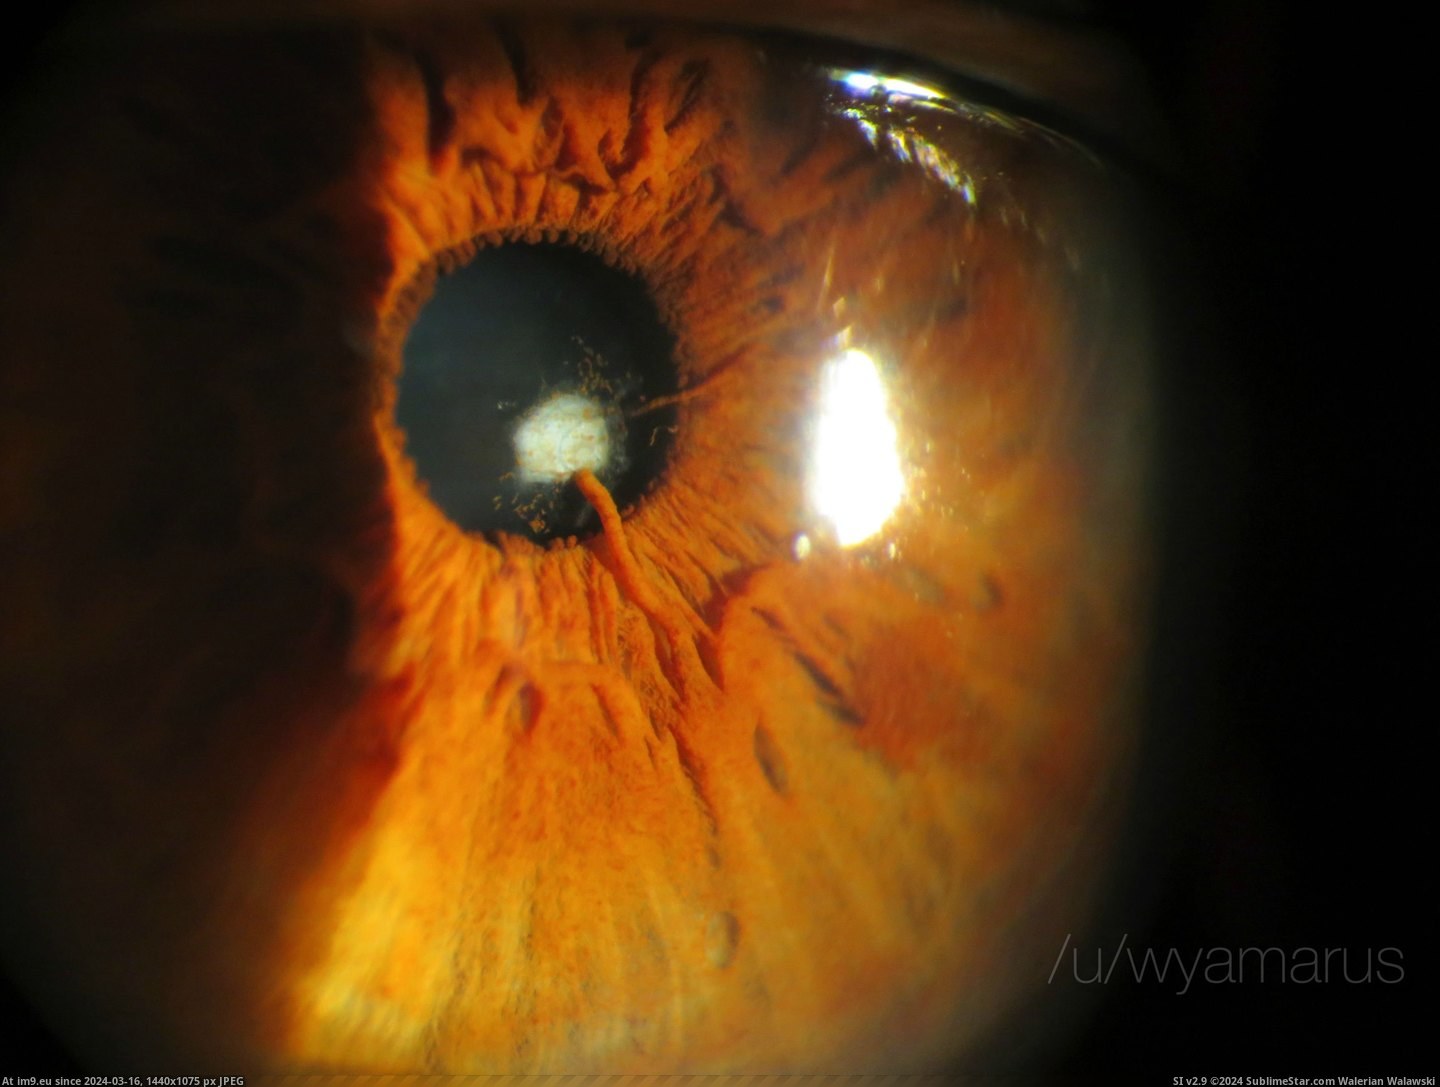 #Wtf #Eye #Lens #Growing #Iris [Wtf] This persons iris started growing into the lens of the eye. Pic. (Image of album My r/WTF favs))